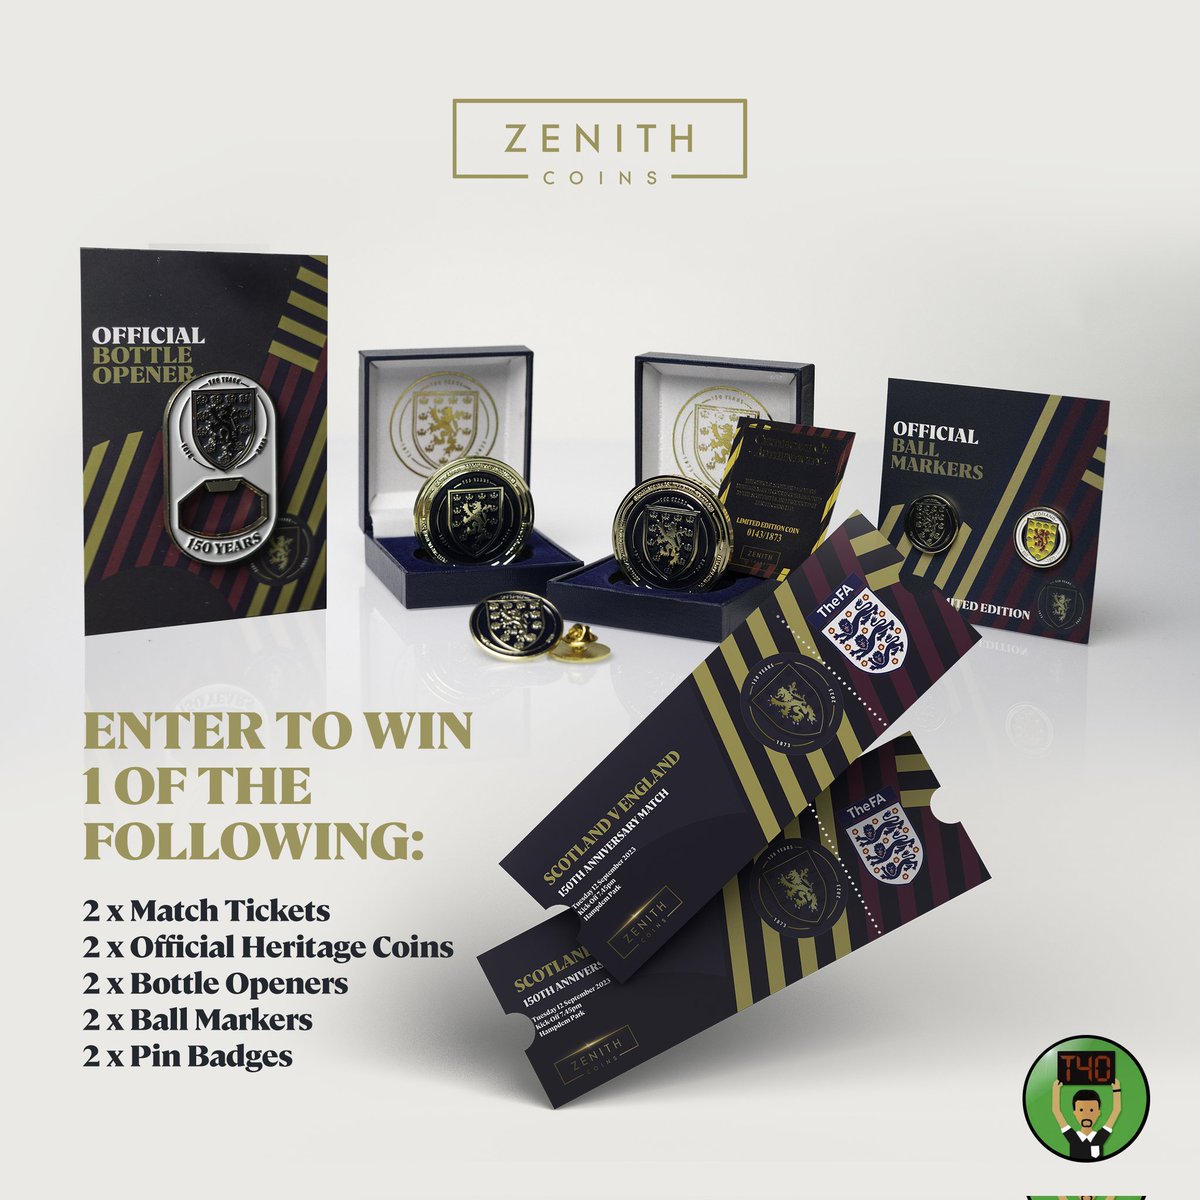 👀 Huge giveaway in collaboration with The 4th Official and Zenith Coins. The biggest prize is 2 tickets to the Scotland Vs England game for a lucky someone. Also, 4 other winners will be chosen for the other prizes. All you need to do to enter is RETWEET this and to be